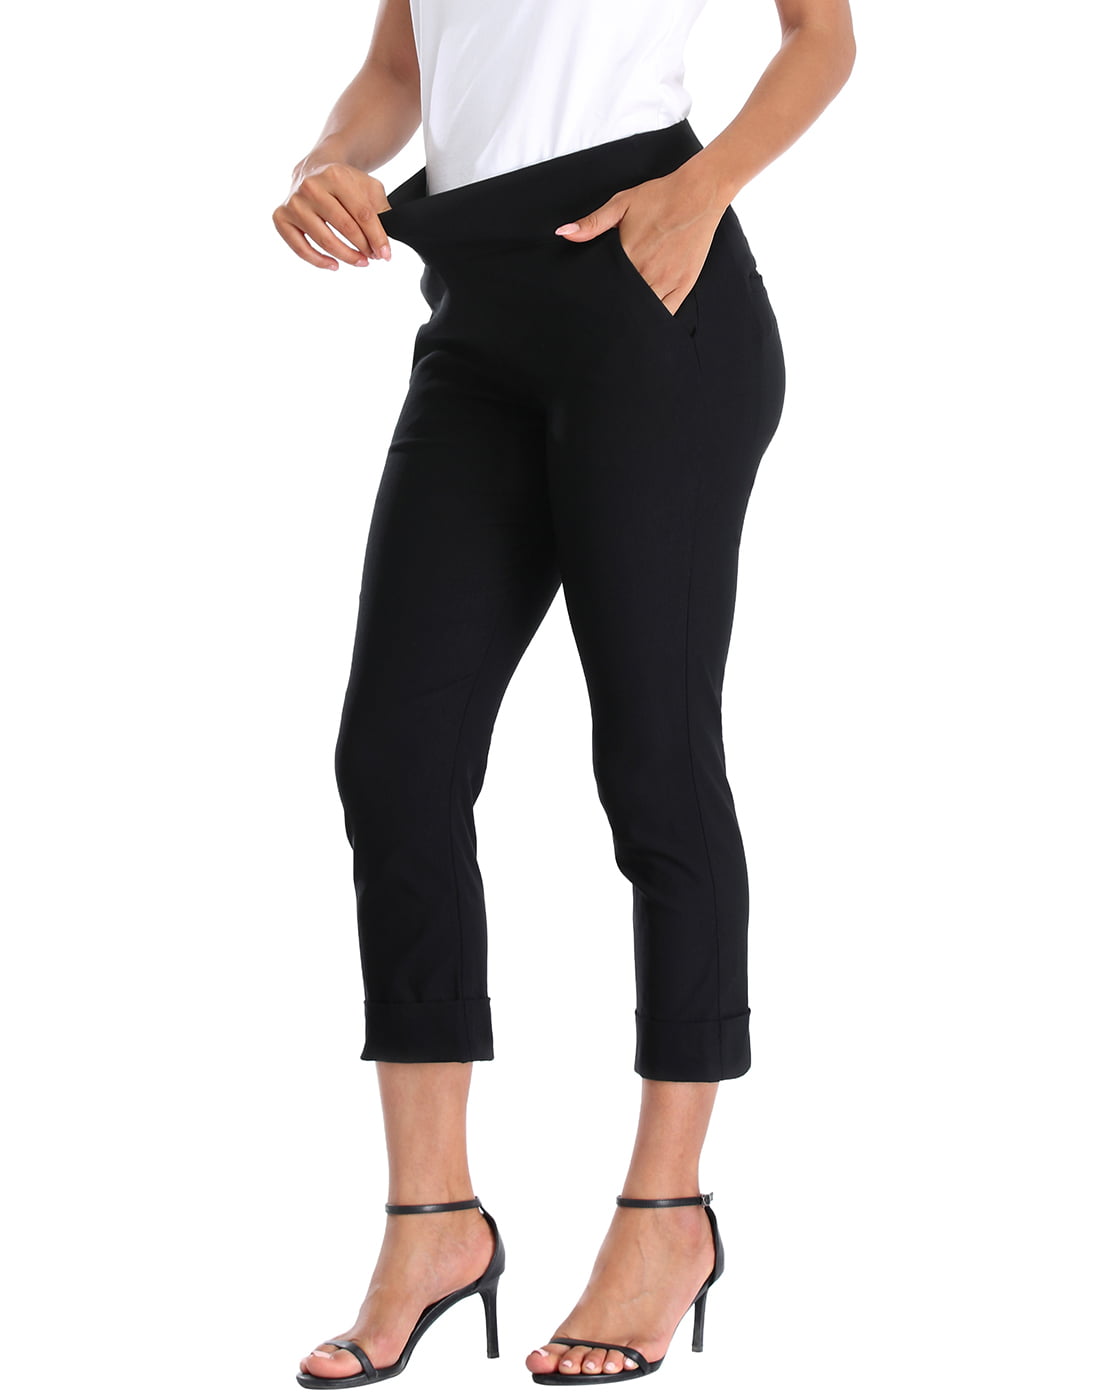 HDE Pull On Capri Pants For Women with Pockets Elastic Waist Cropped Pants  Black - S